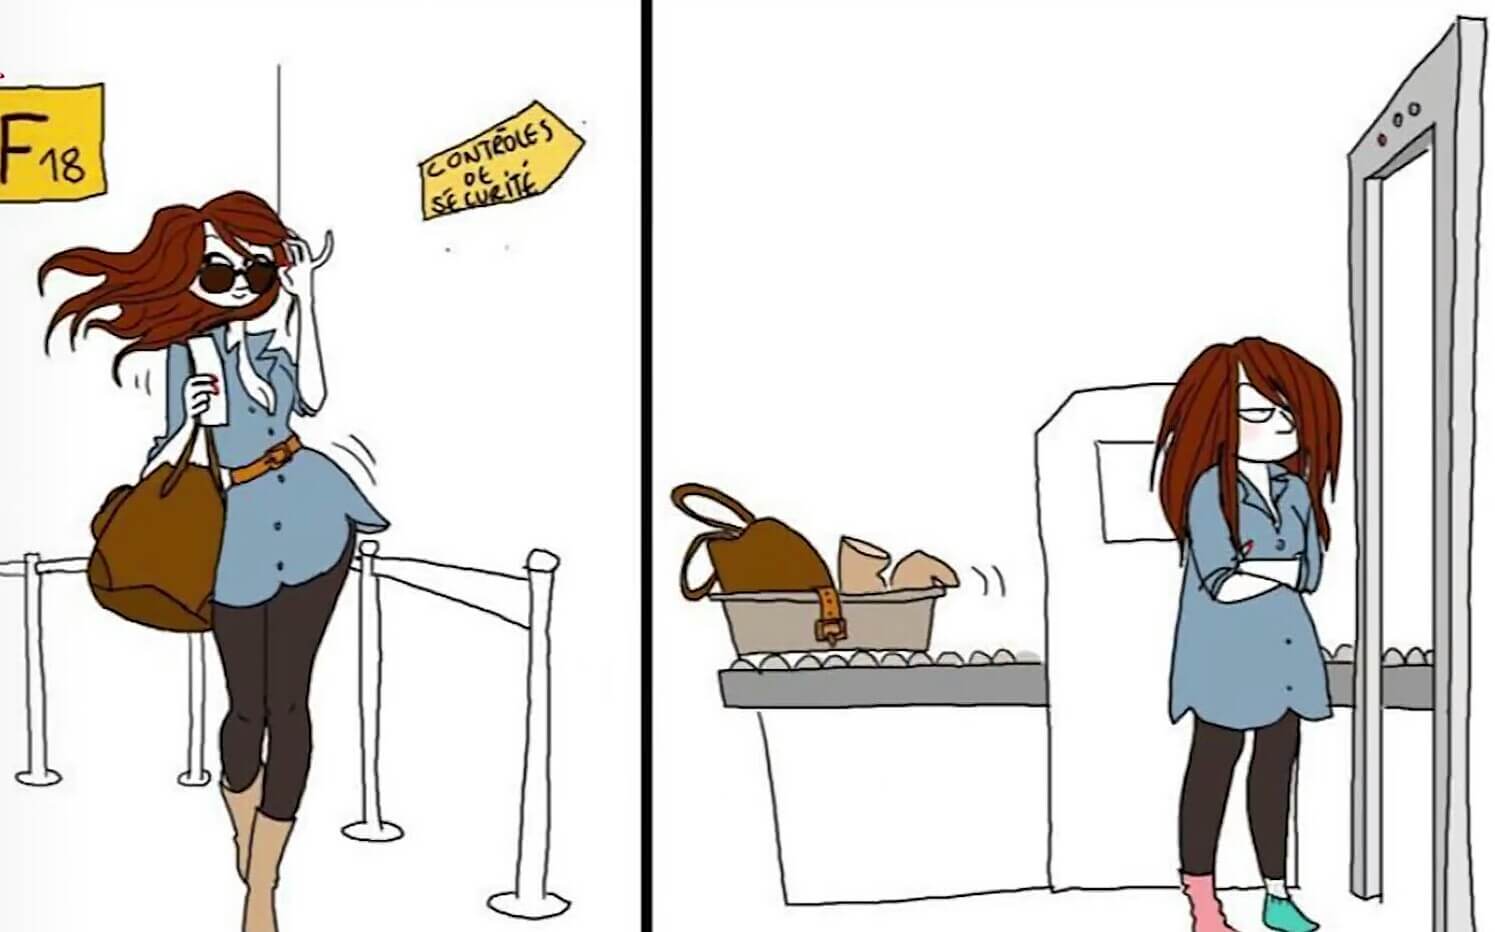 64 Truly Funny Illustrations Show Both Sides Of Society